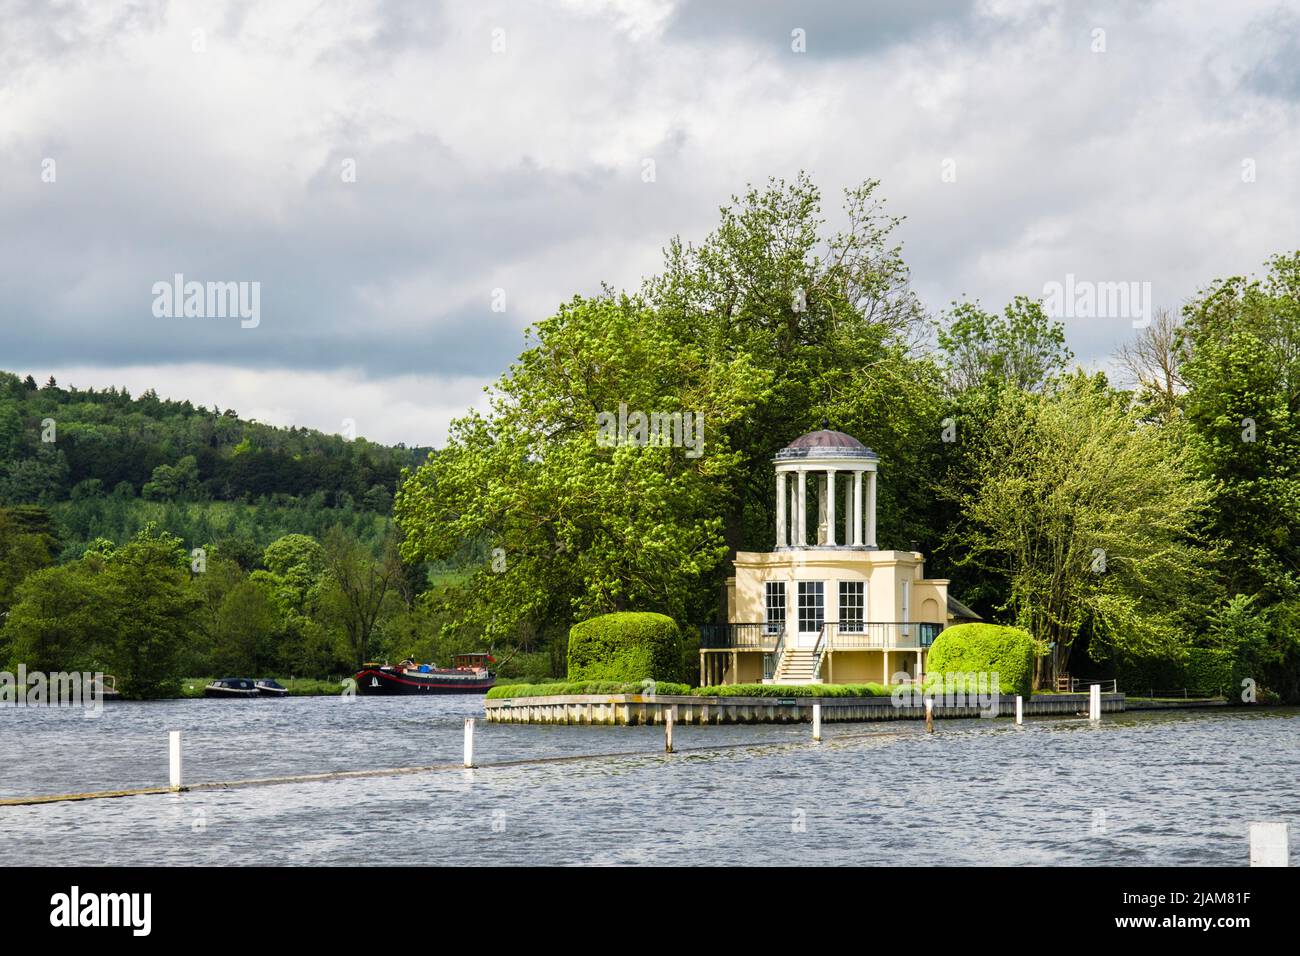 Temple Island in River Thames near Henley on Thames seen from the Thames Path on the Berkshire bank. Remenham, Berkshire, England, UK, Britain Stock Photo